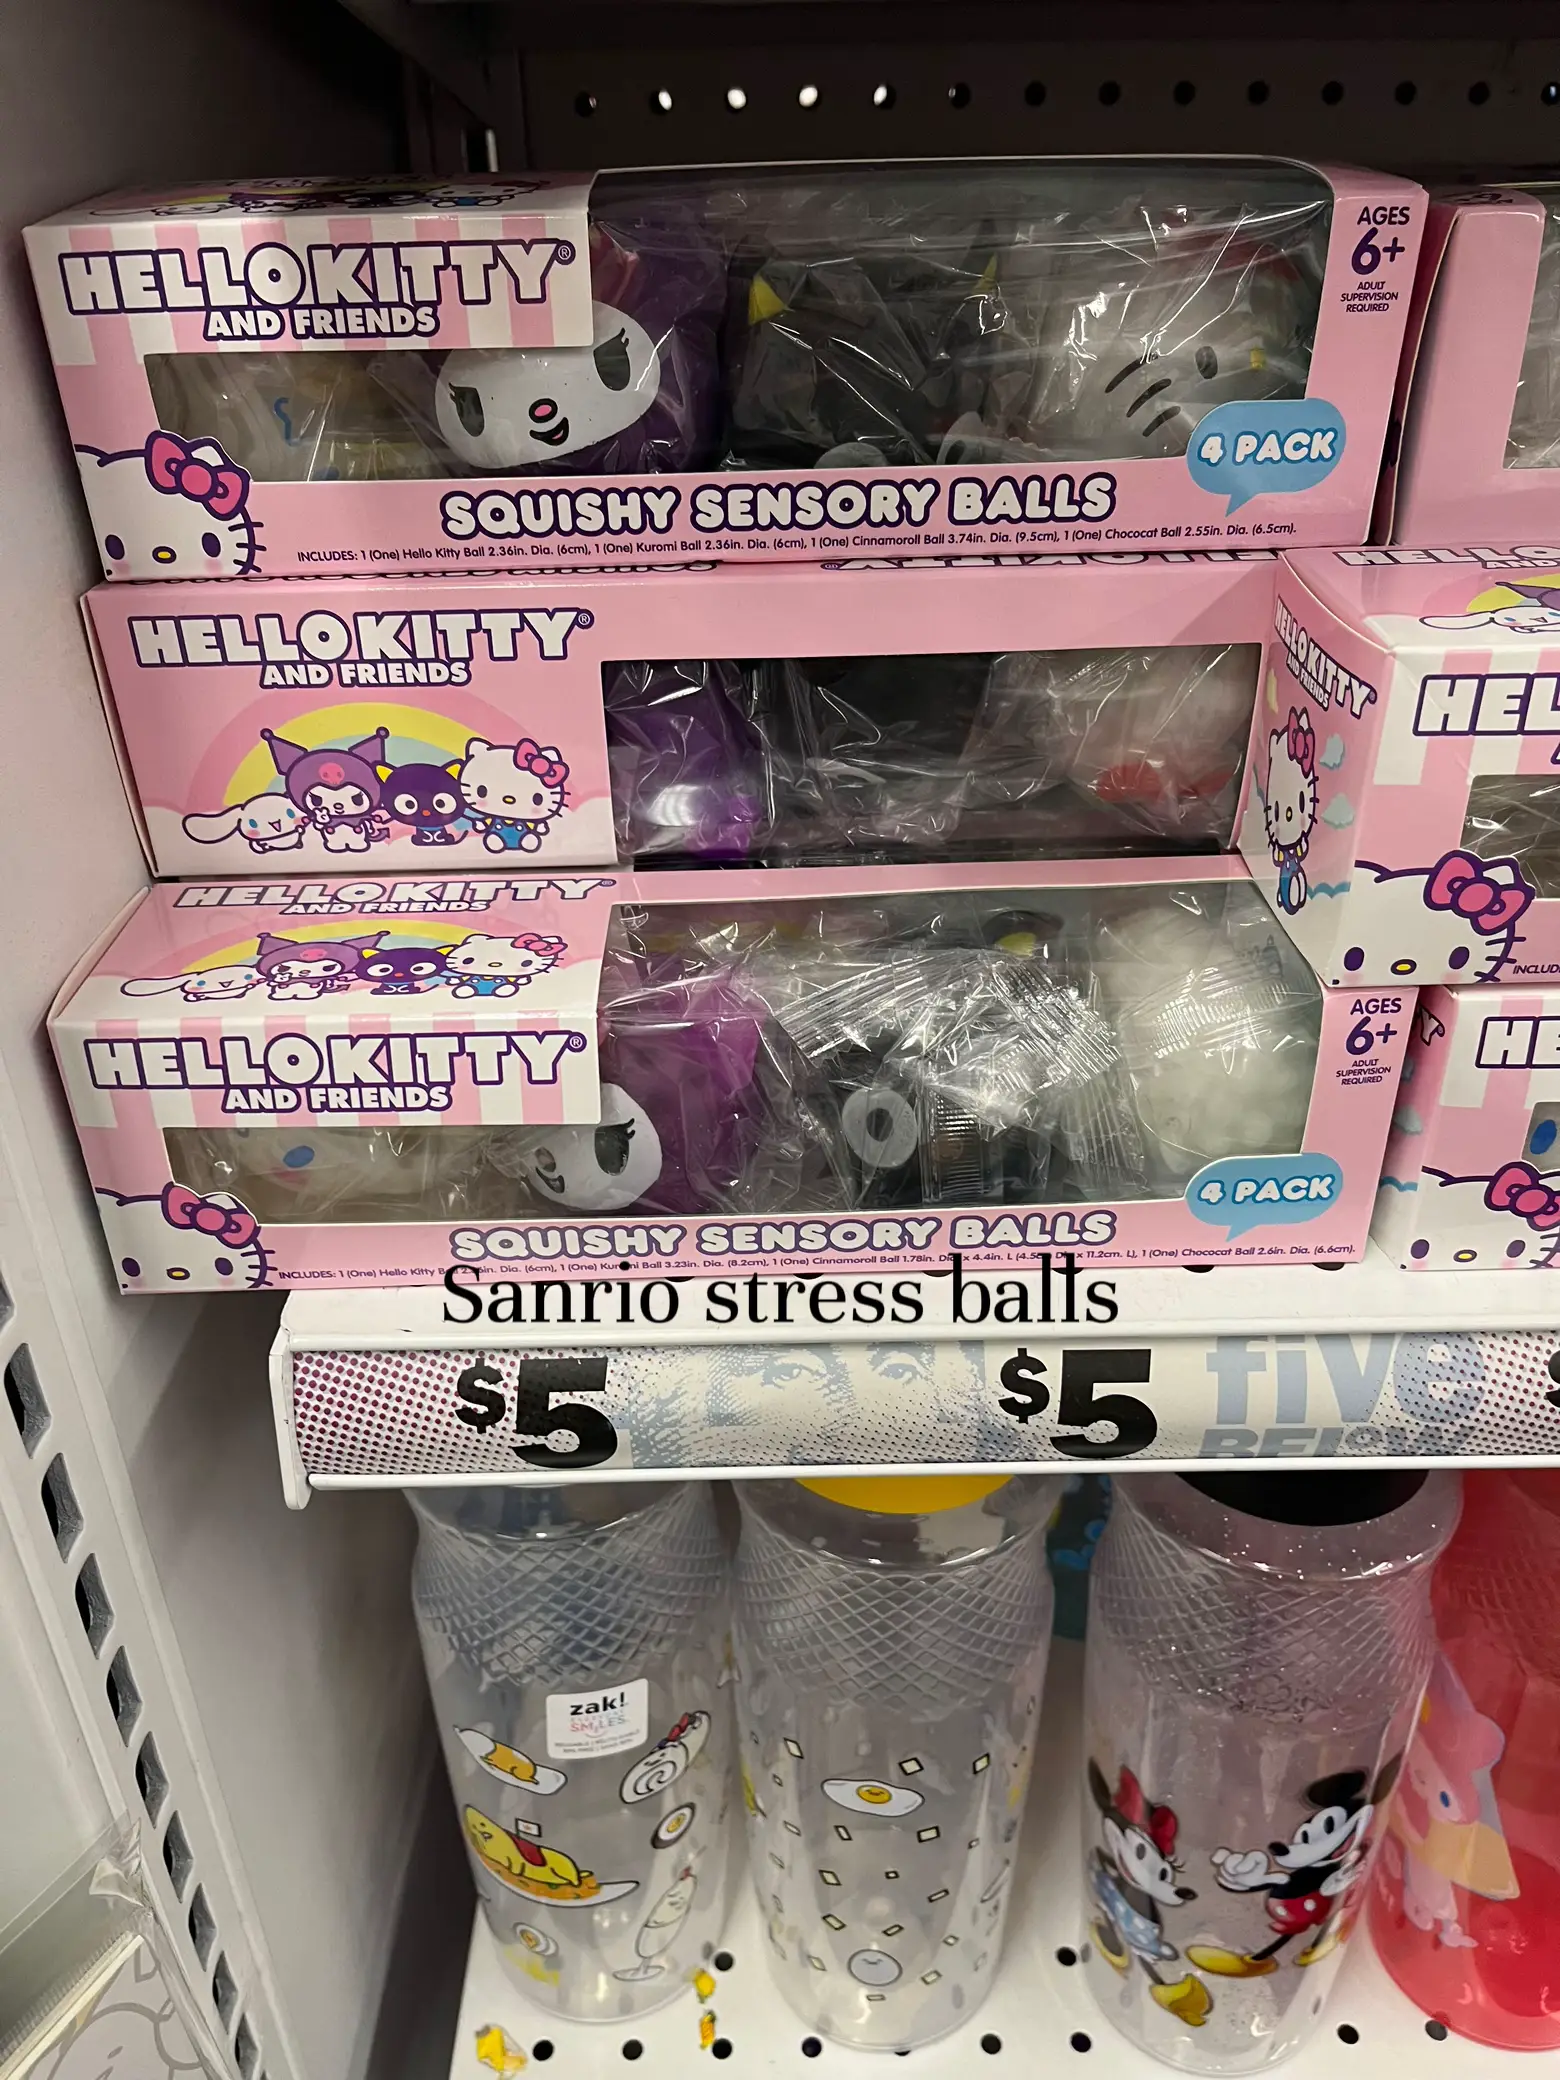 CUTE Five Below Finds, Gallery posted by Love Makyle